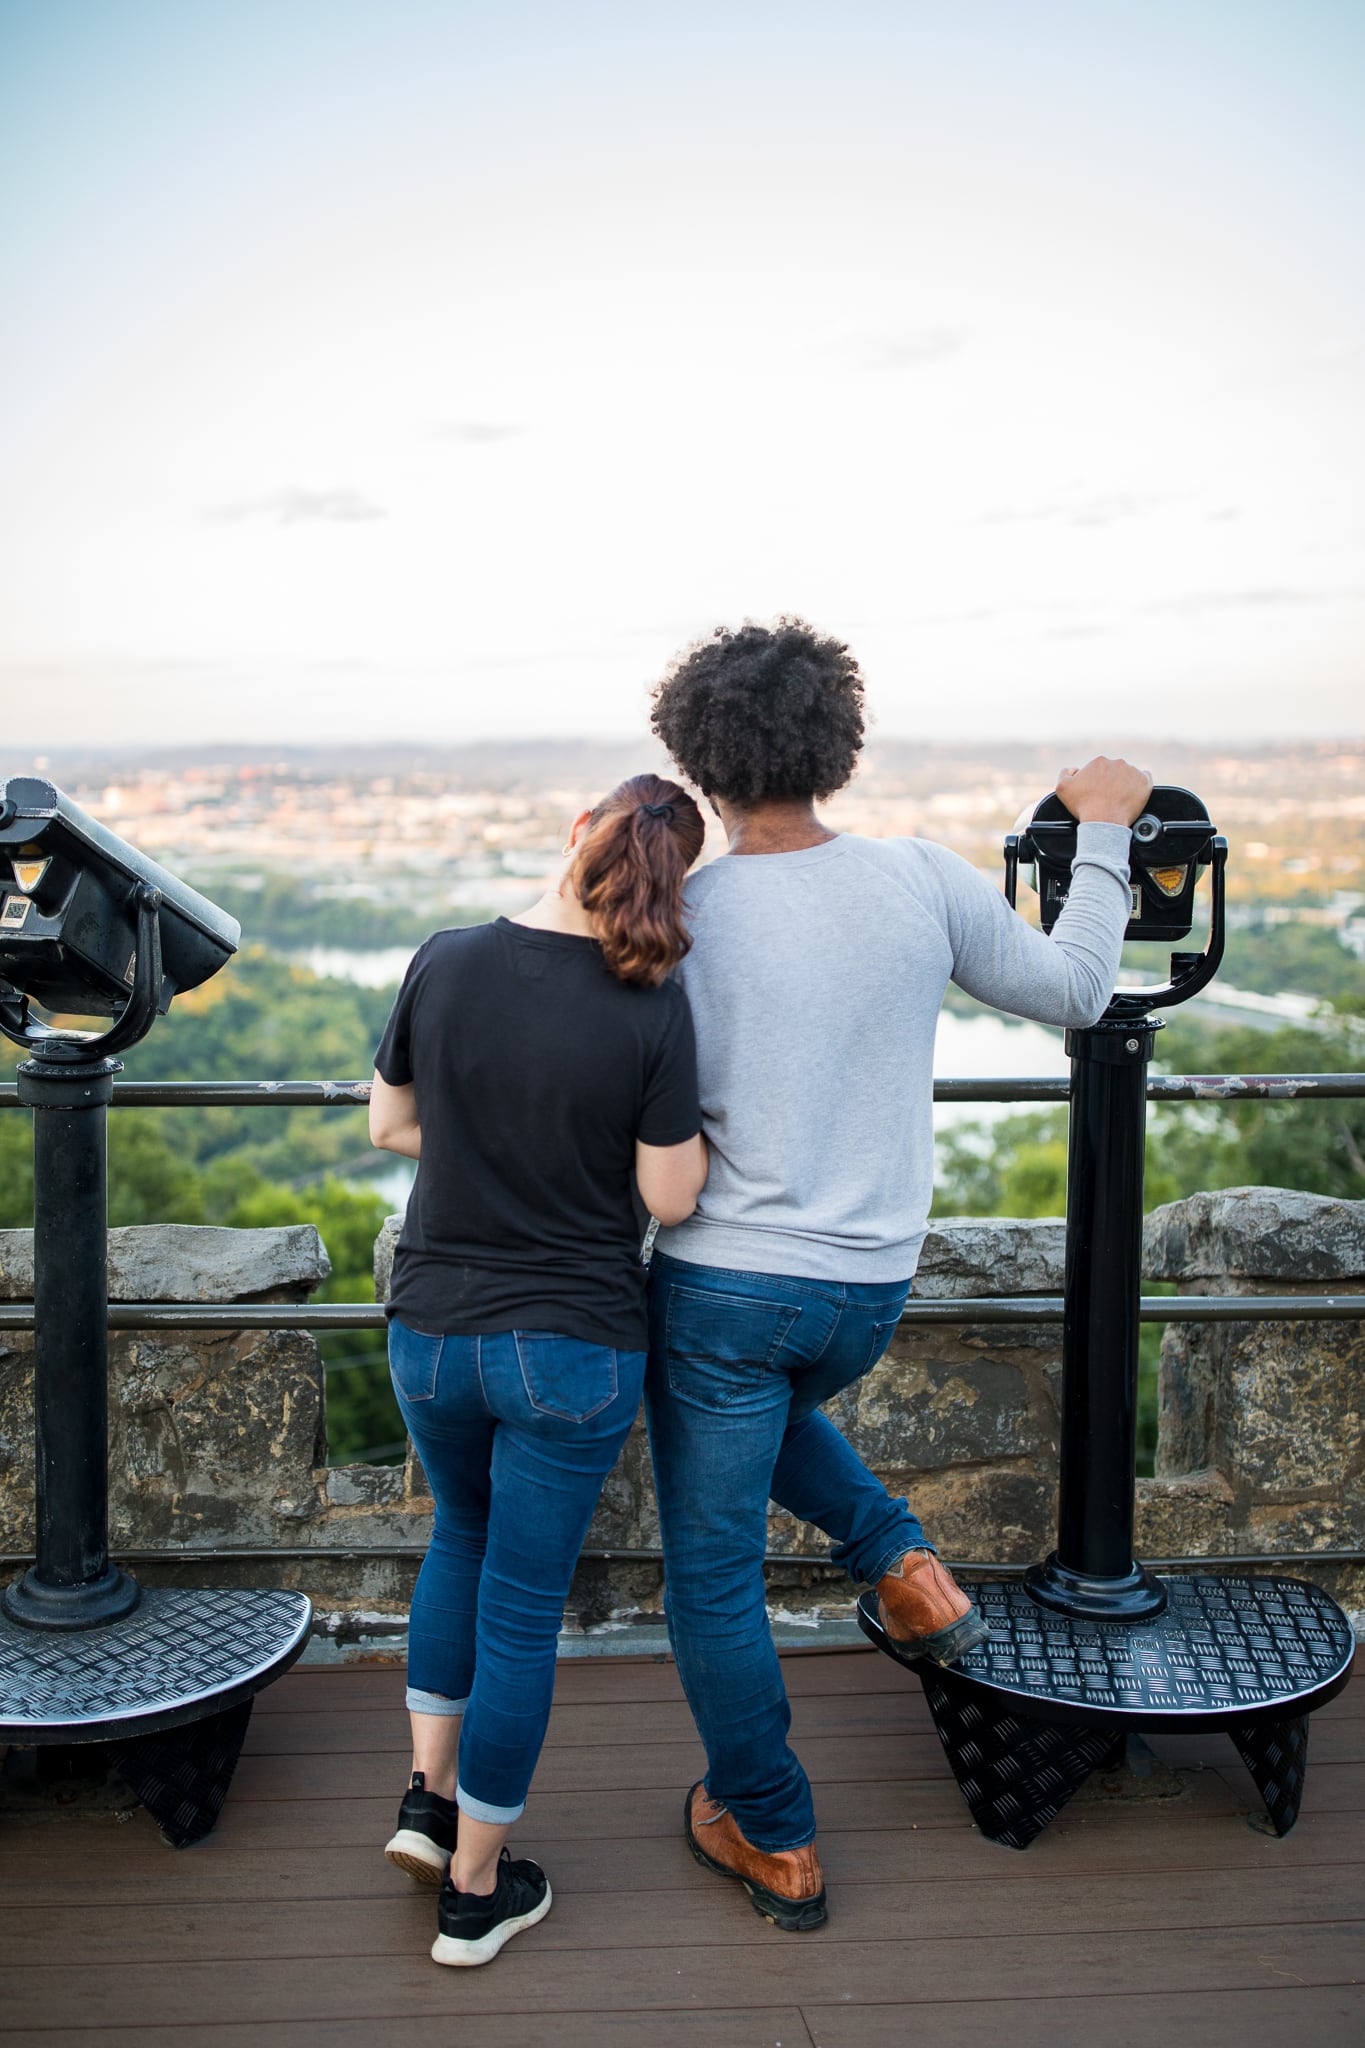 A man and woman, shown from behind, look over a scenic overlook